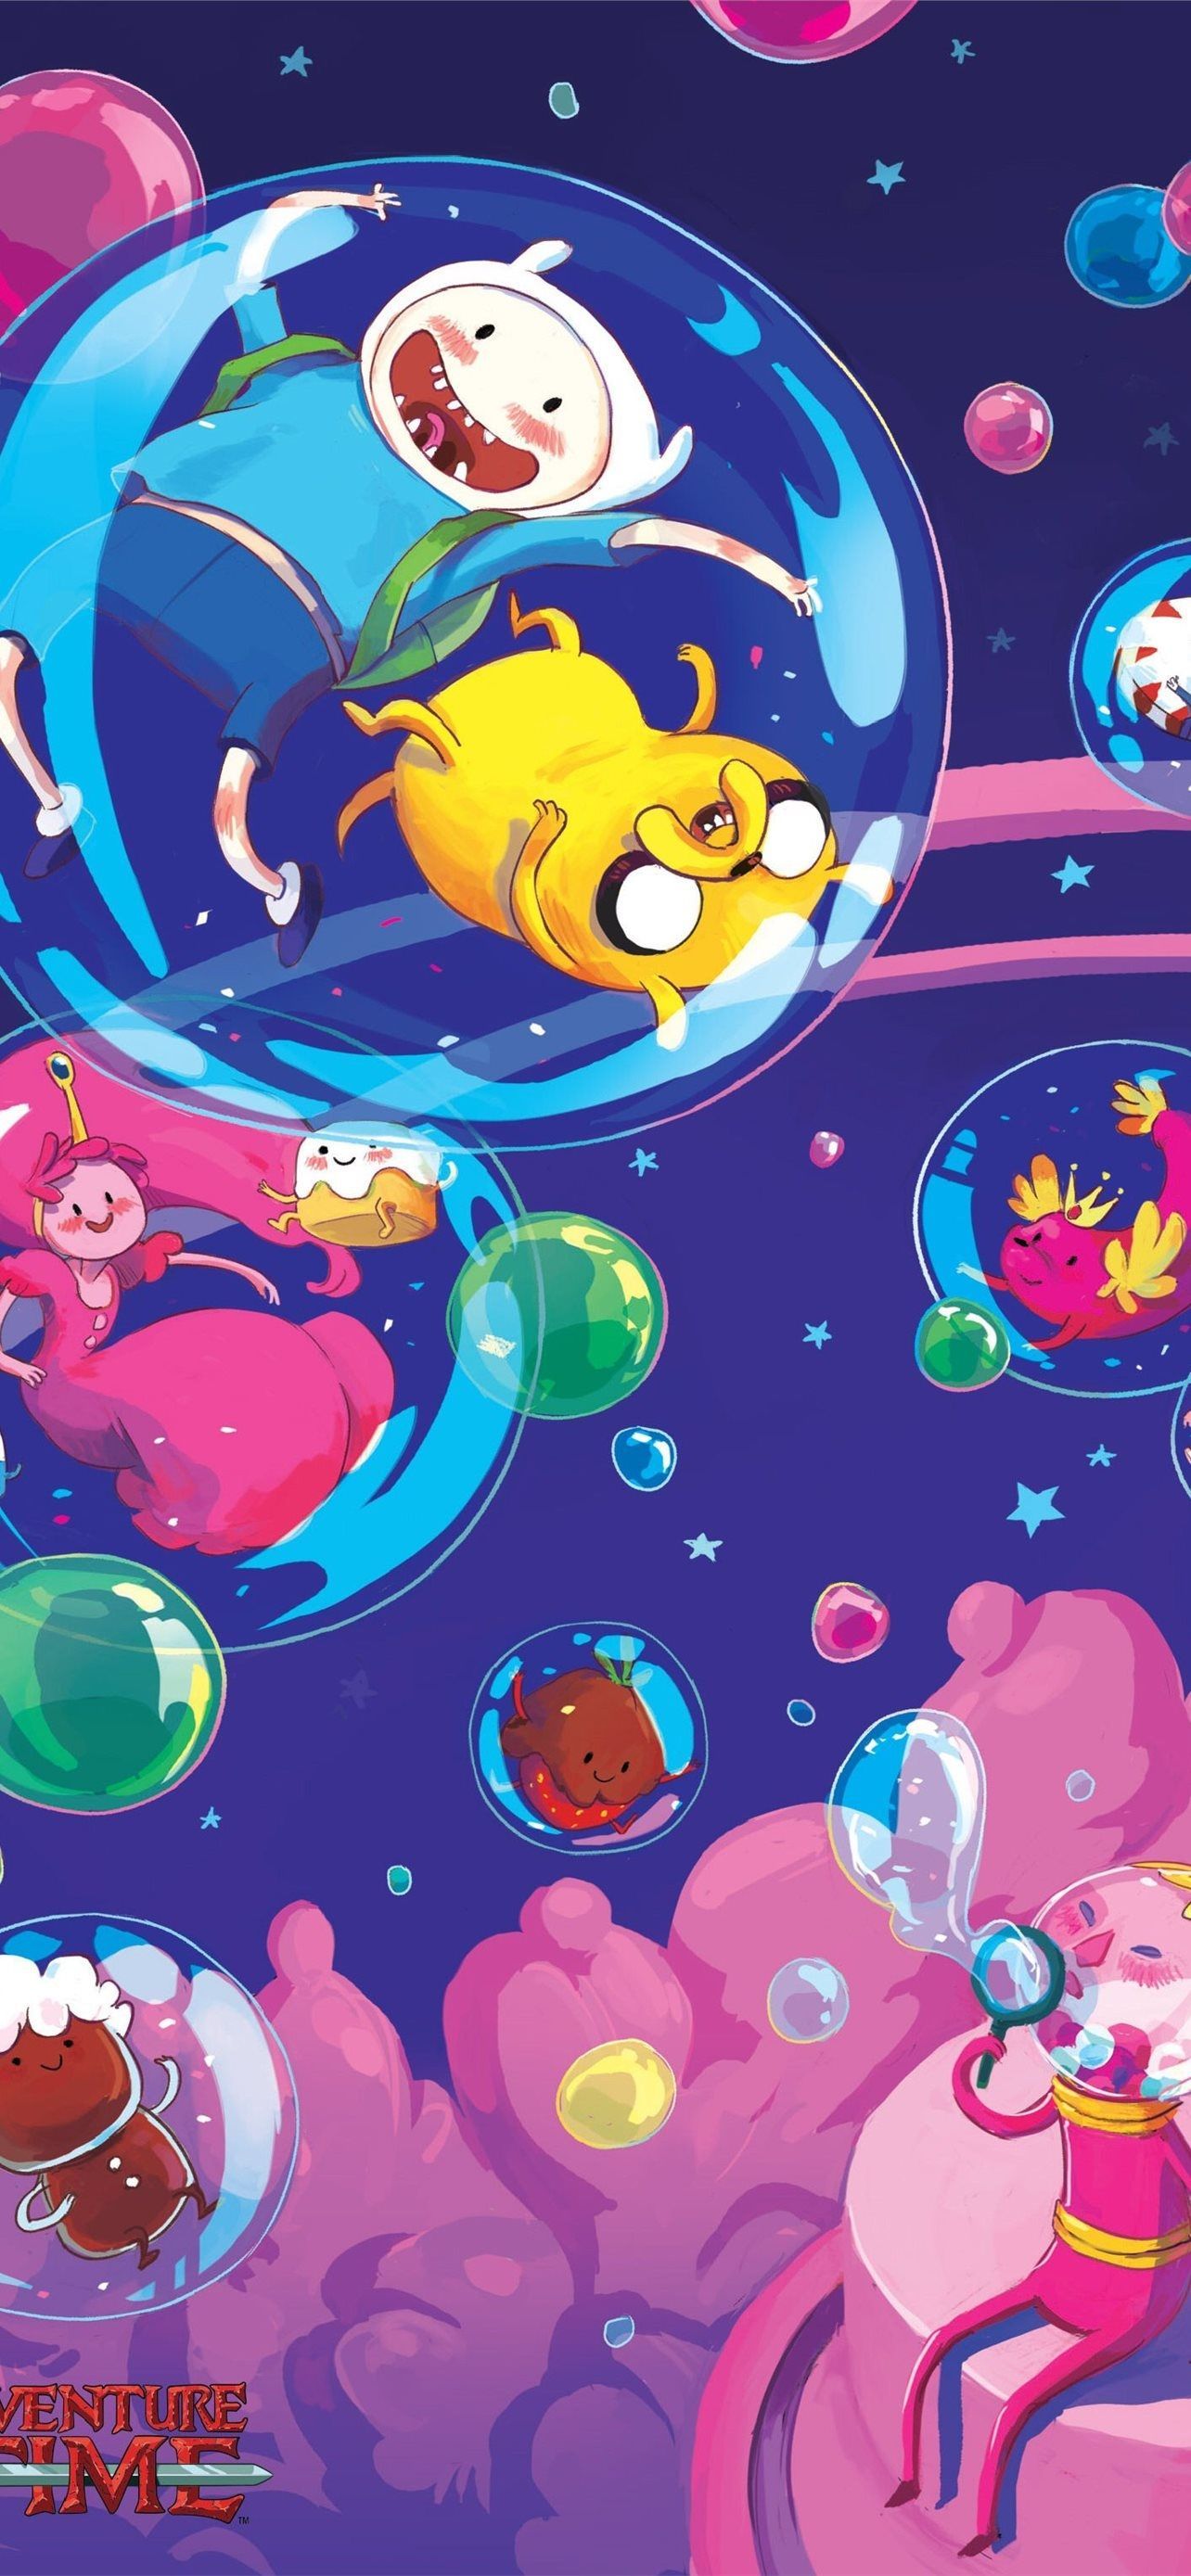 Adventure Time And Jake Inside The Boat Wallpaper Download